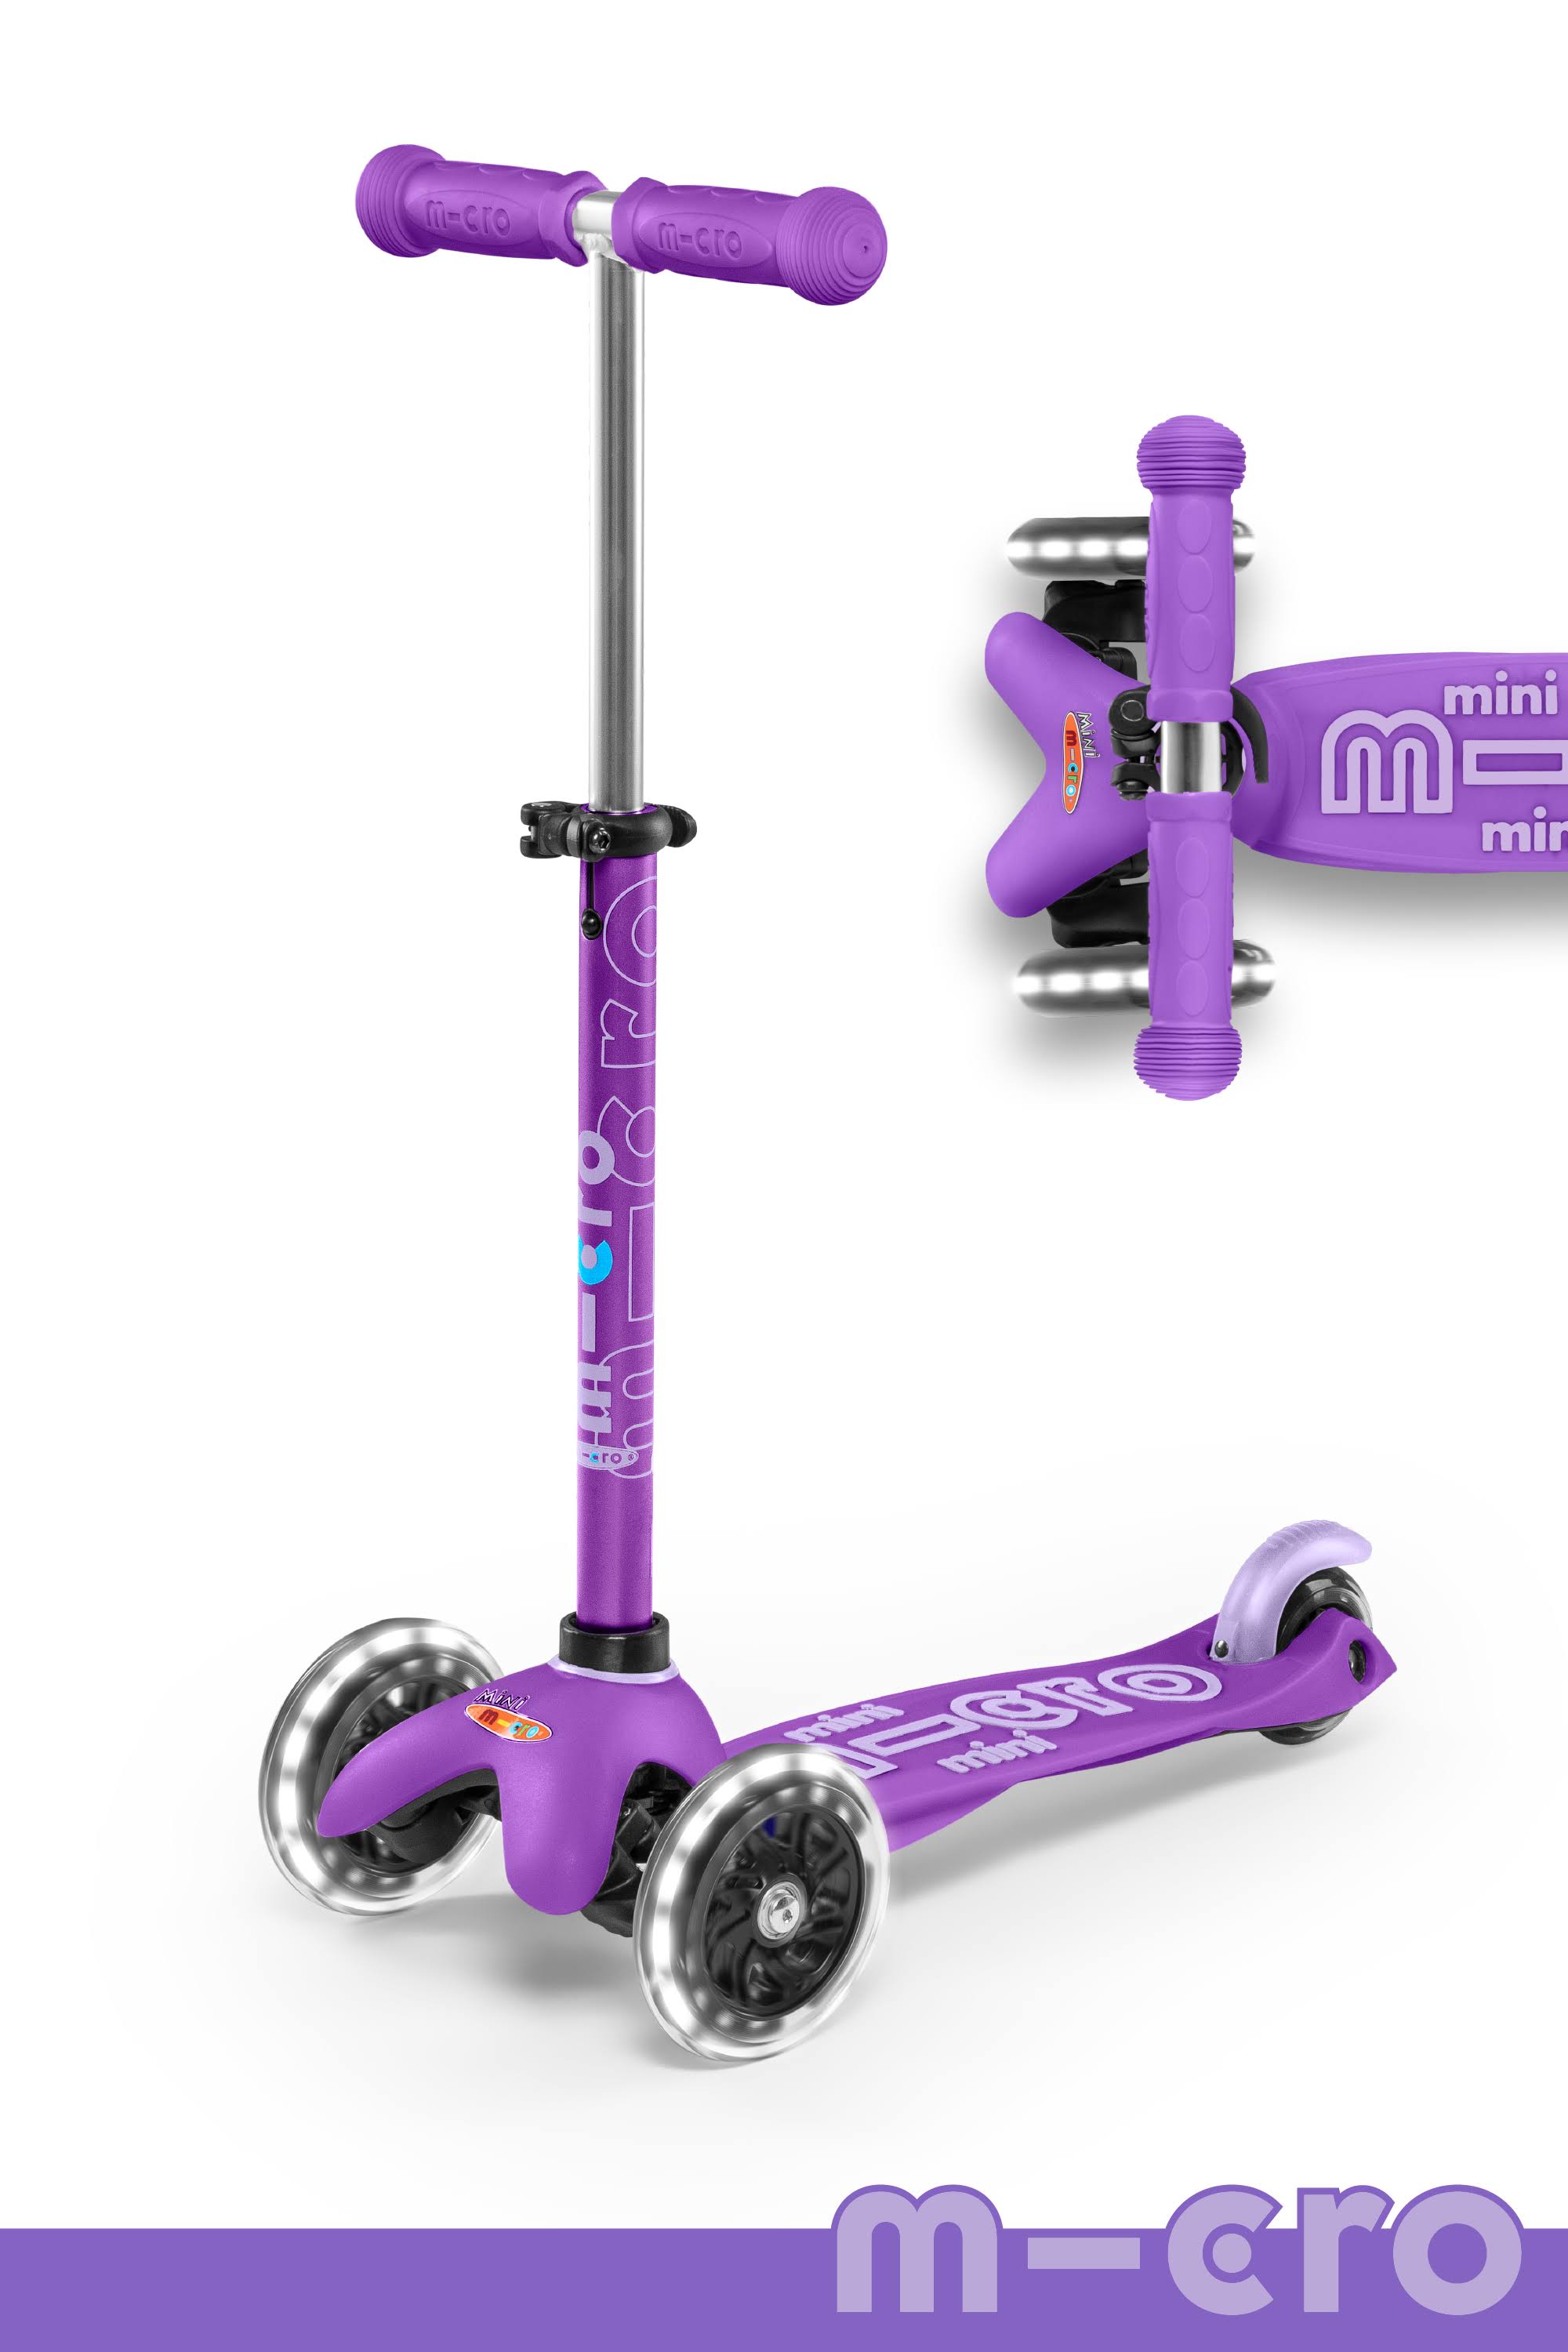 Micro Scooter Mini Deluxe Led Purple in One Colour